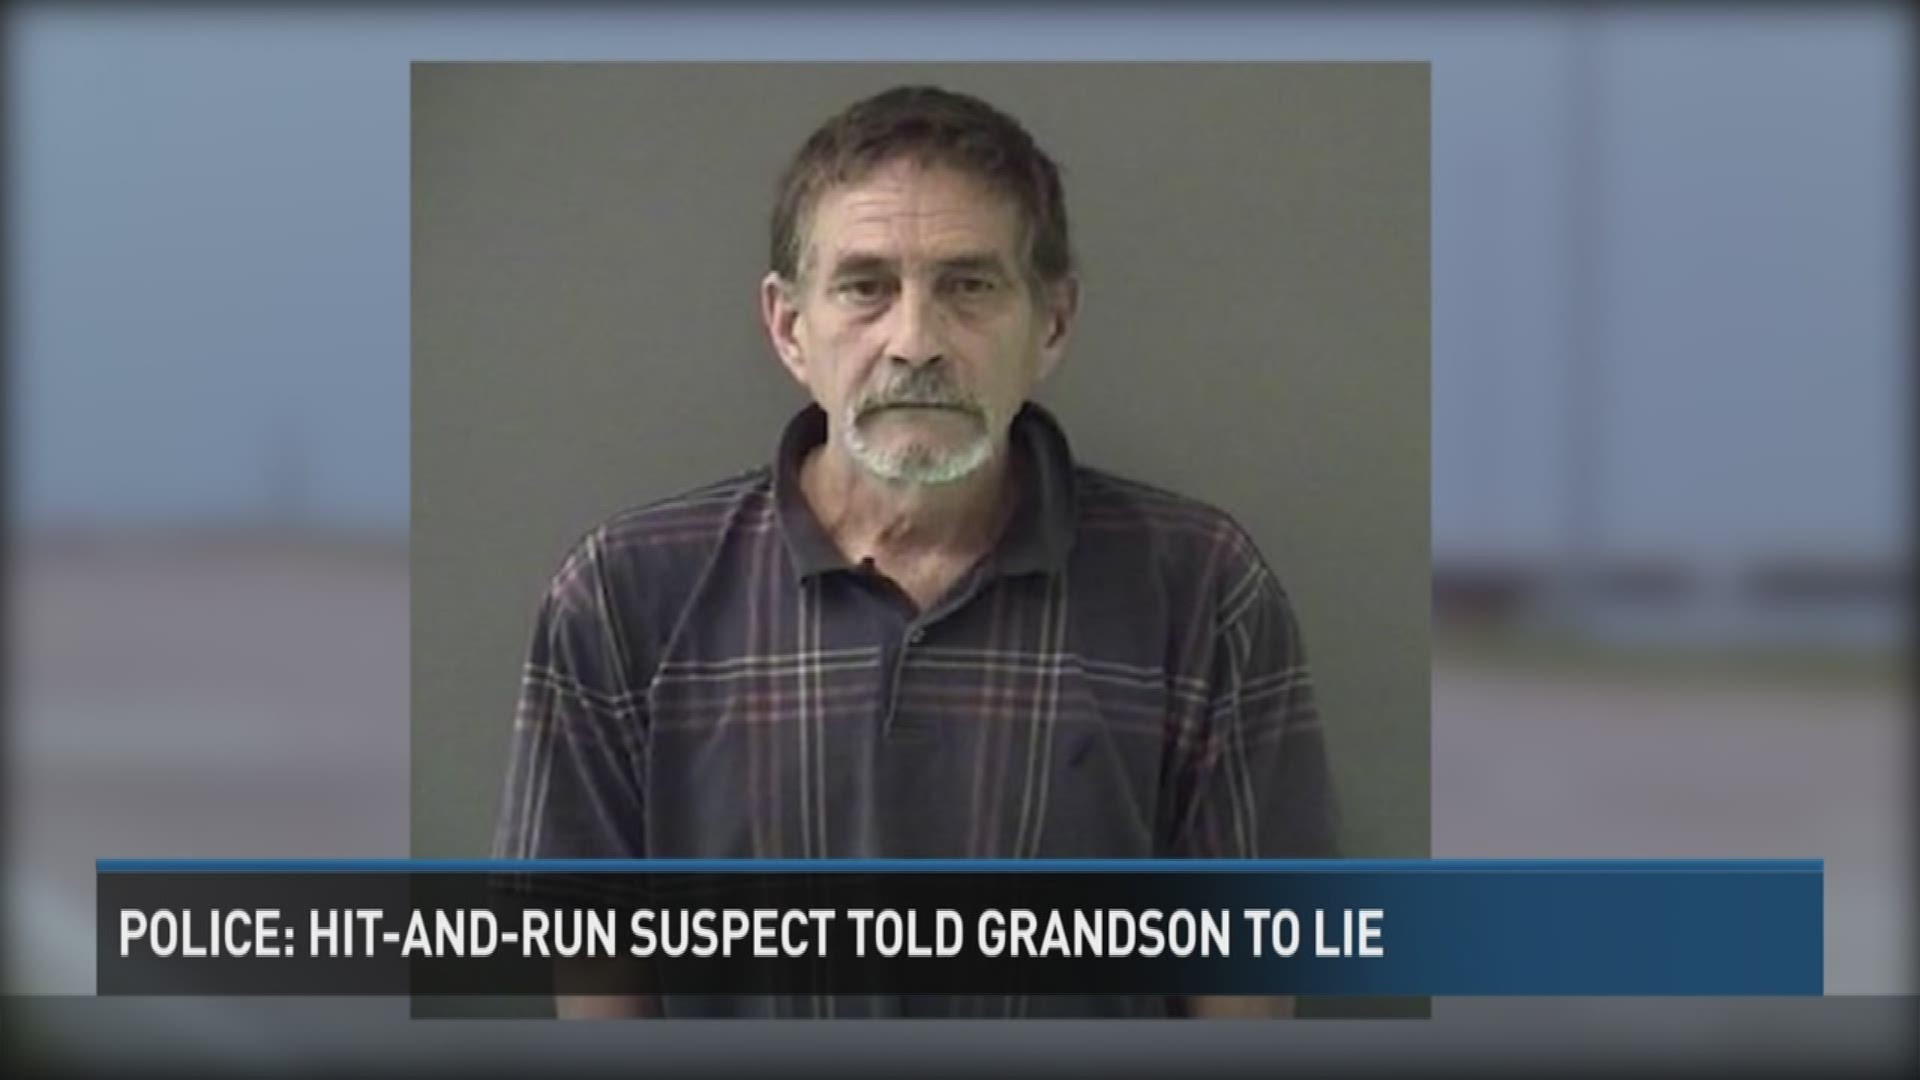 A newly obtained document suggests the suspect told his grandson to lie to police. 